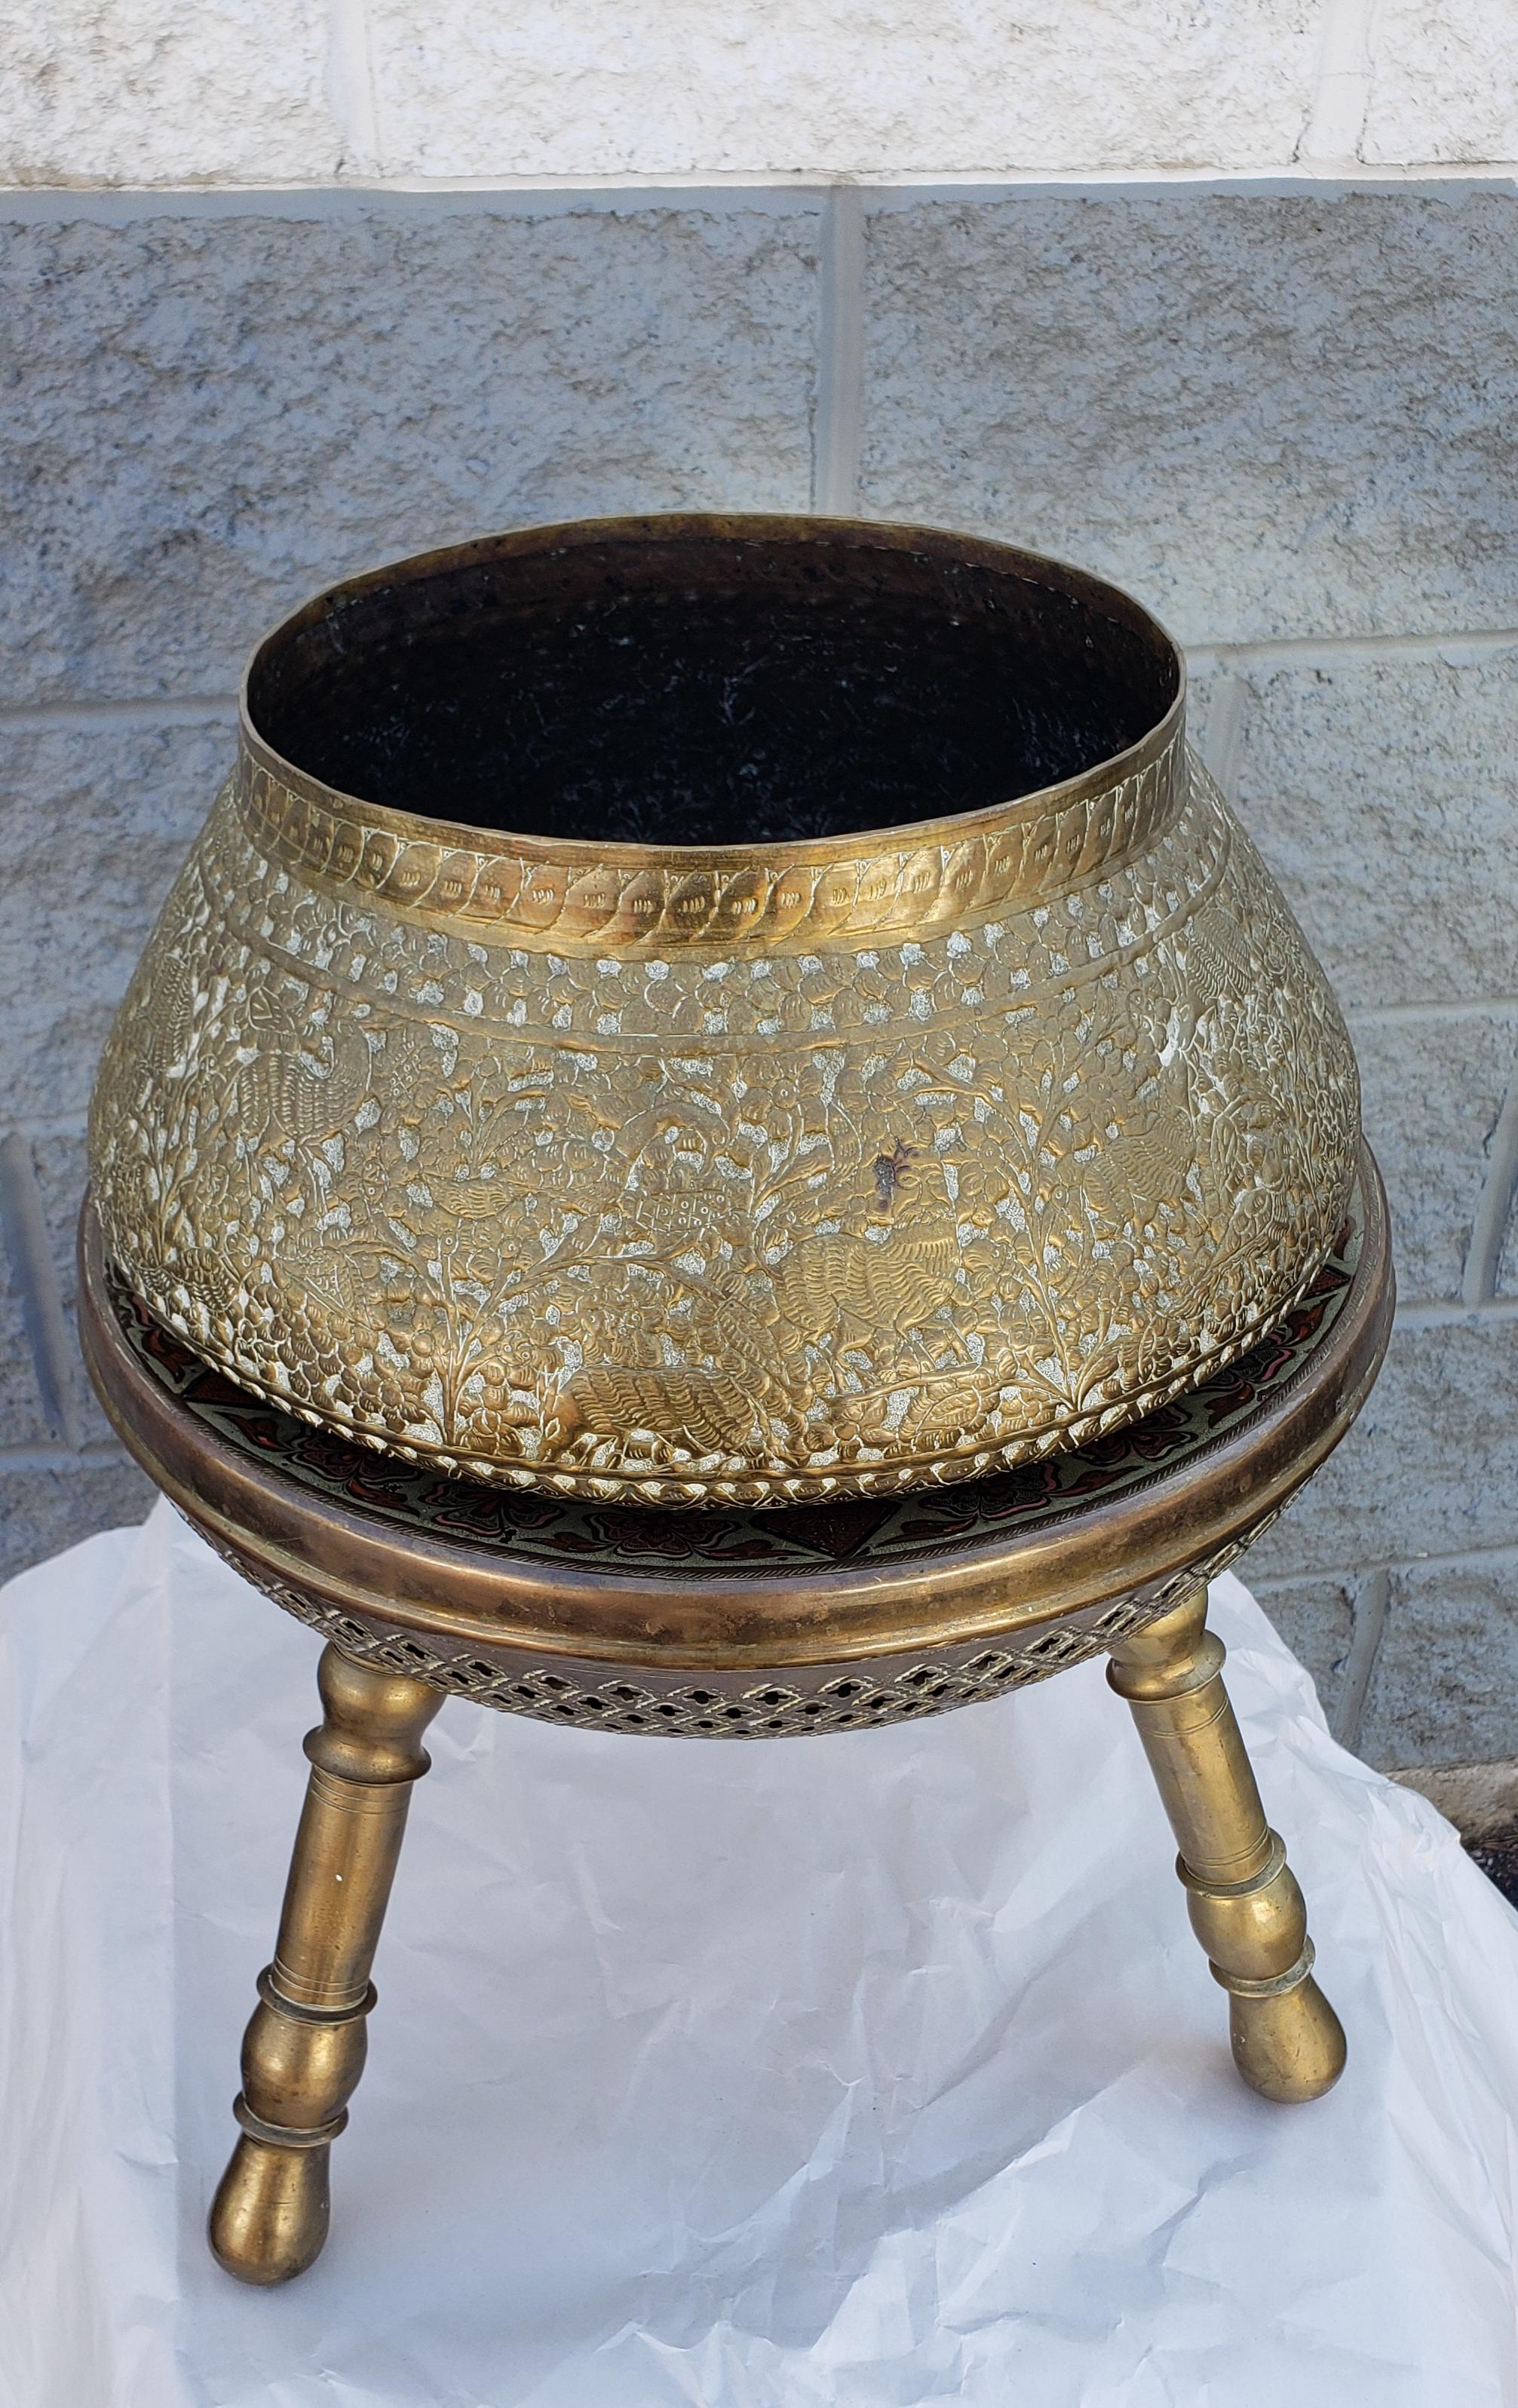 Anglo-Indian Indian Repoussé & Engraved Brass Bowl / Planter on Engraved Brass Stand / Stool For Sale